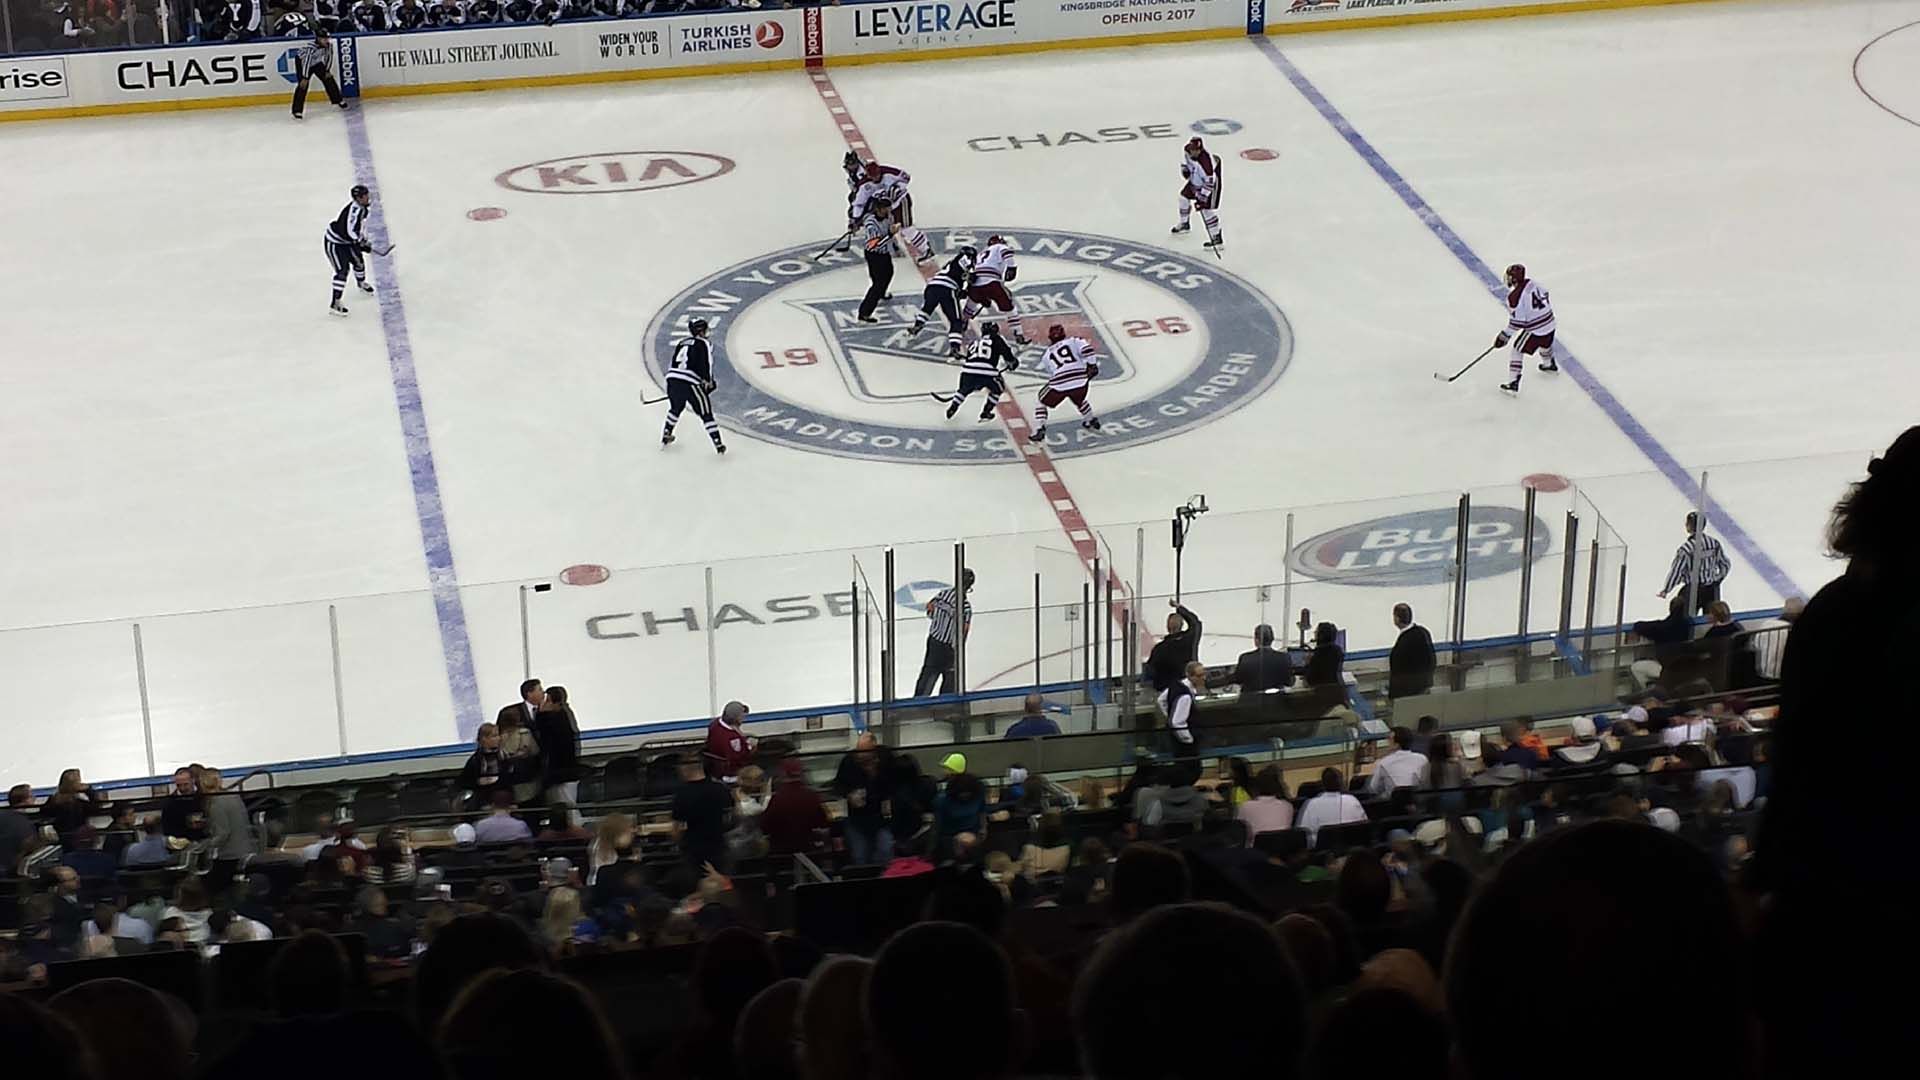 The Harvard and Yale Hockey teams facing off in Madison Square Garden in New York City